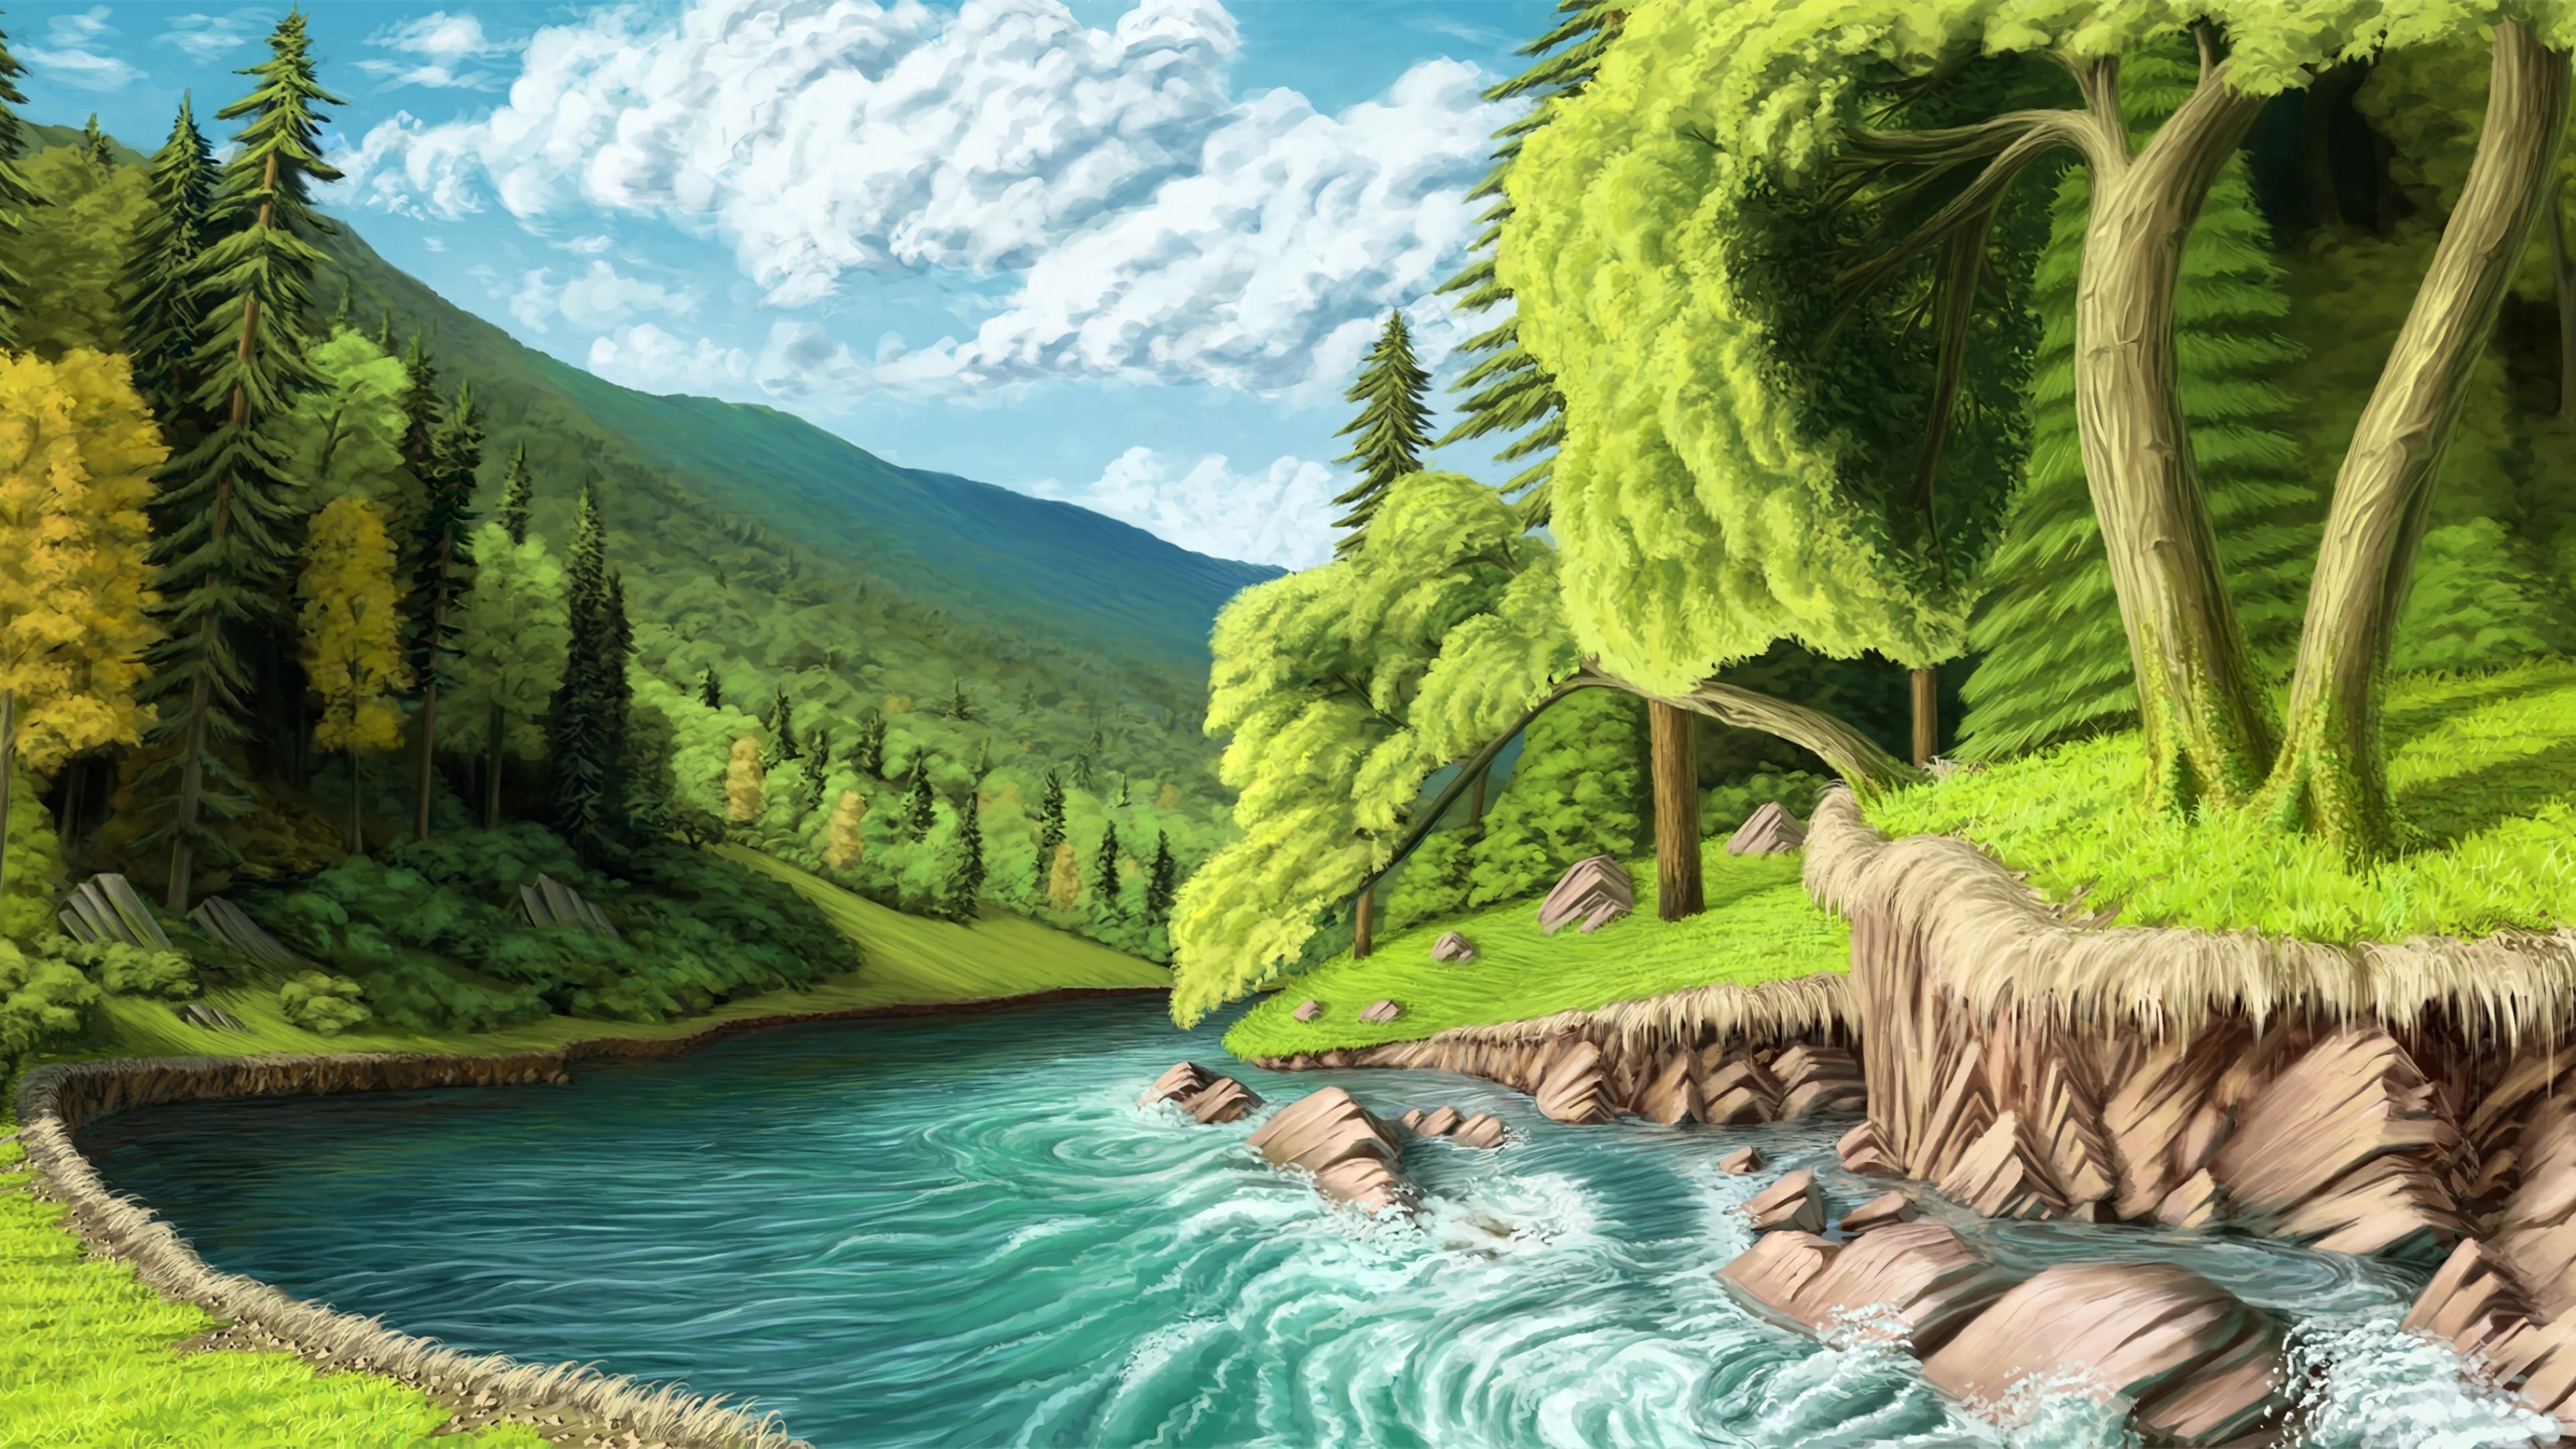 3840 x 2160 · jpeg - Fairy Tale River and Forest Scenery 4K wallpaper